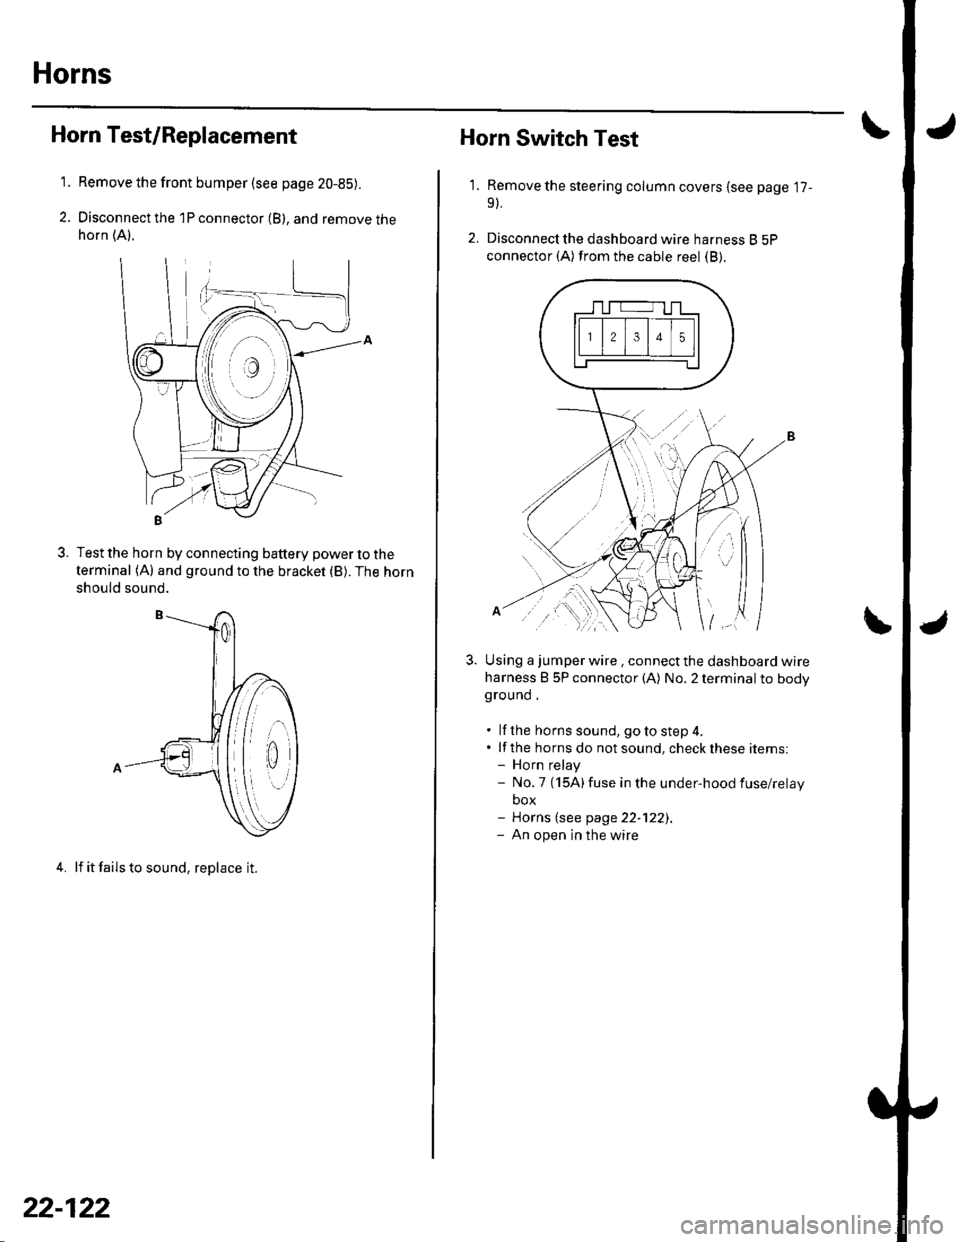 HONDA CIVIC 2003 7.G Workshop Manual Horns
1.
3.
Horn Test/Replacement
Remove the front bumper {see page 20-85).
Disconnect the 1P connector (B), and remove thehorn (A).
Test the horn by connecting battery power to the
terminal (A) and g